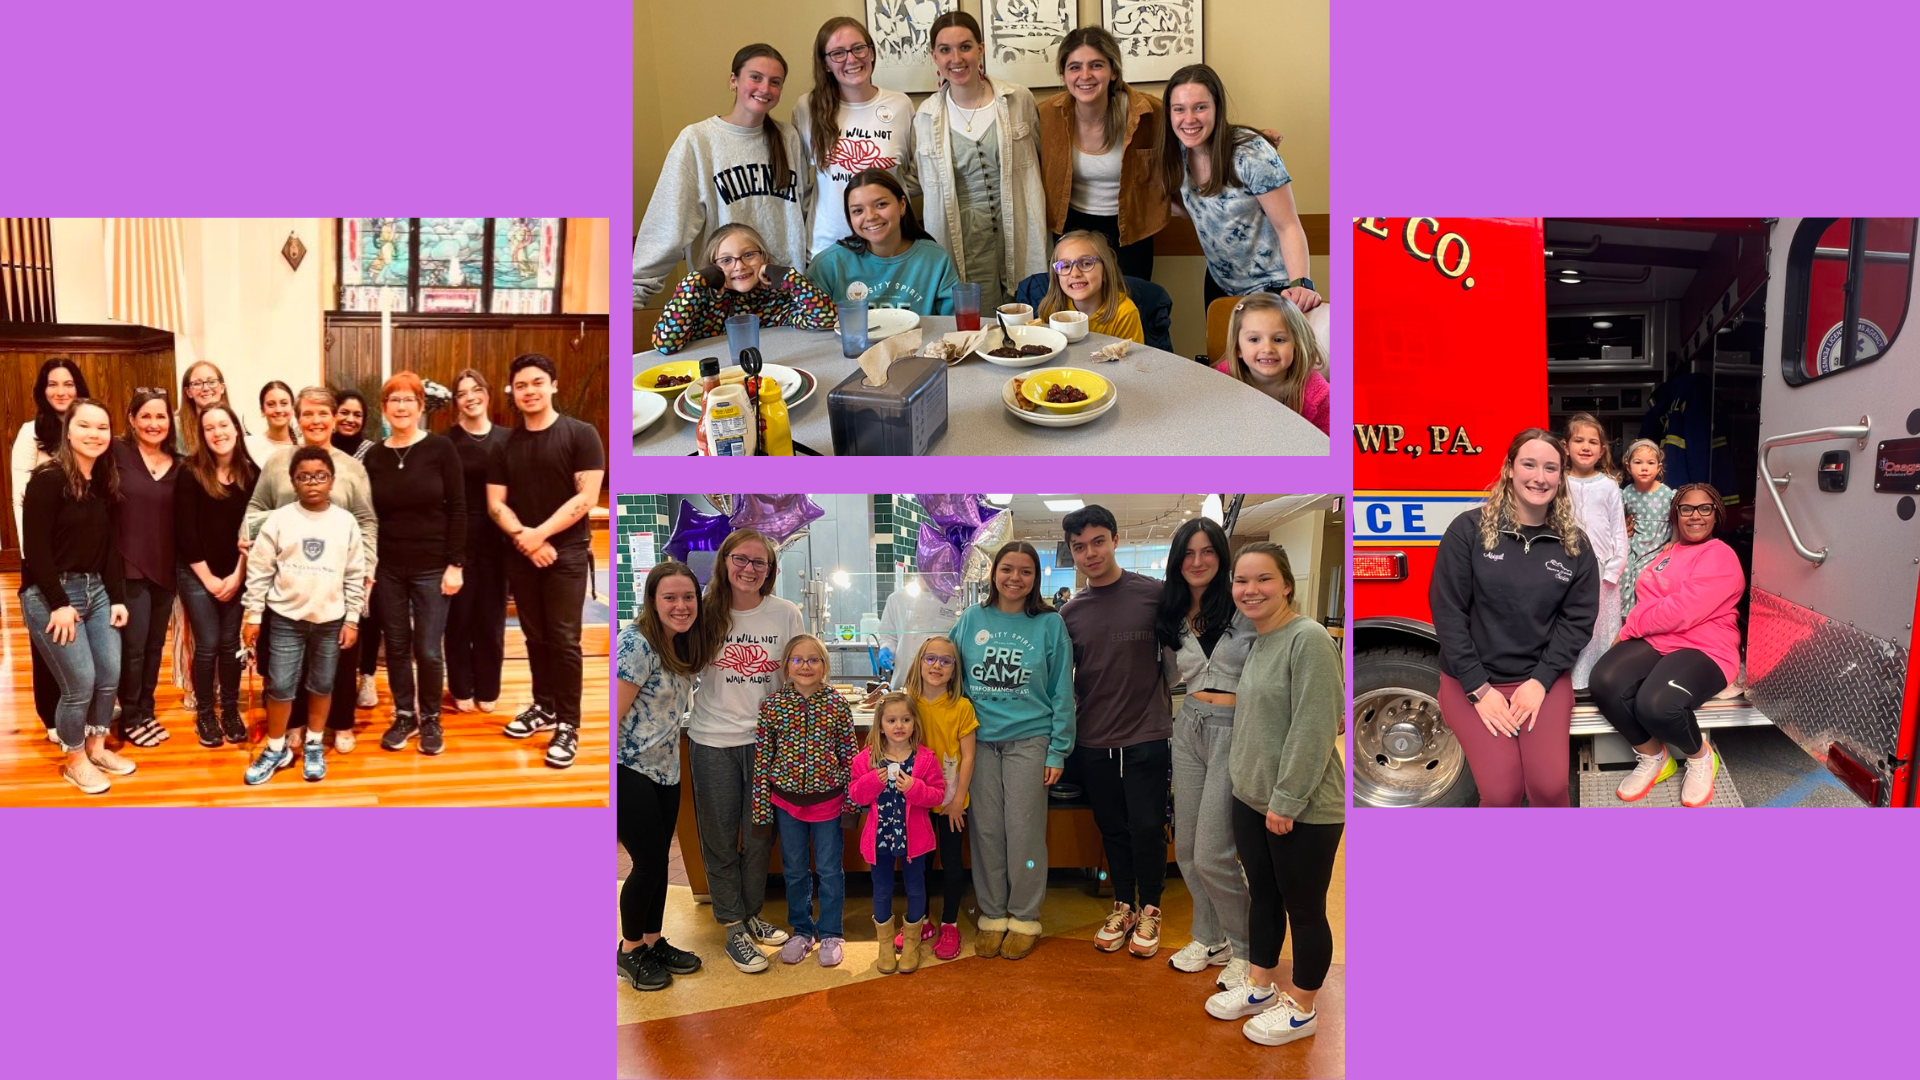 images of American Sign Language students from The University of Scranton participating at various community events